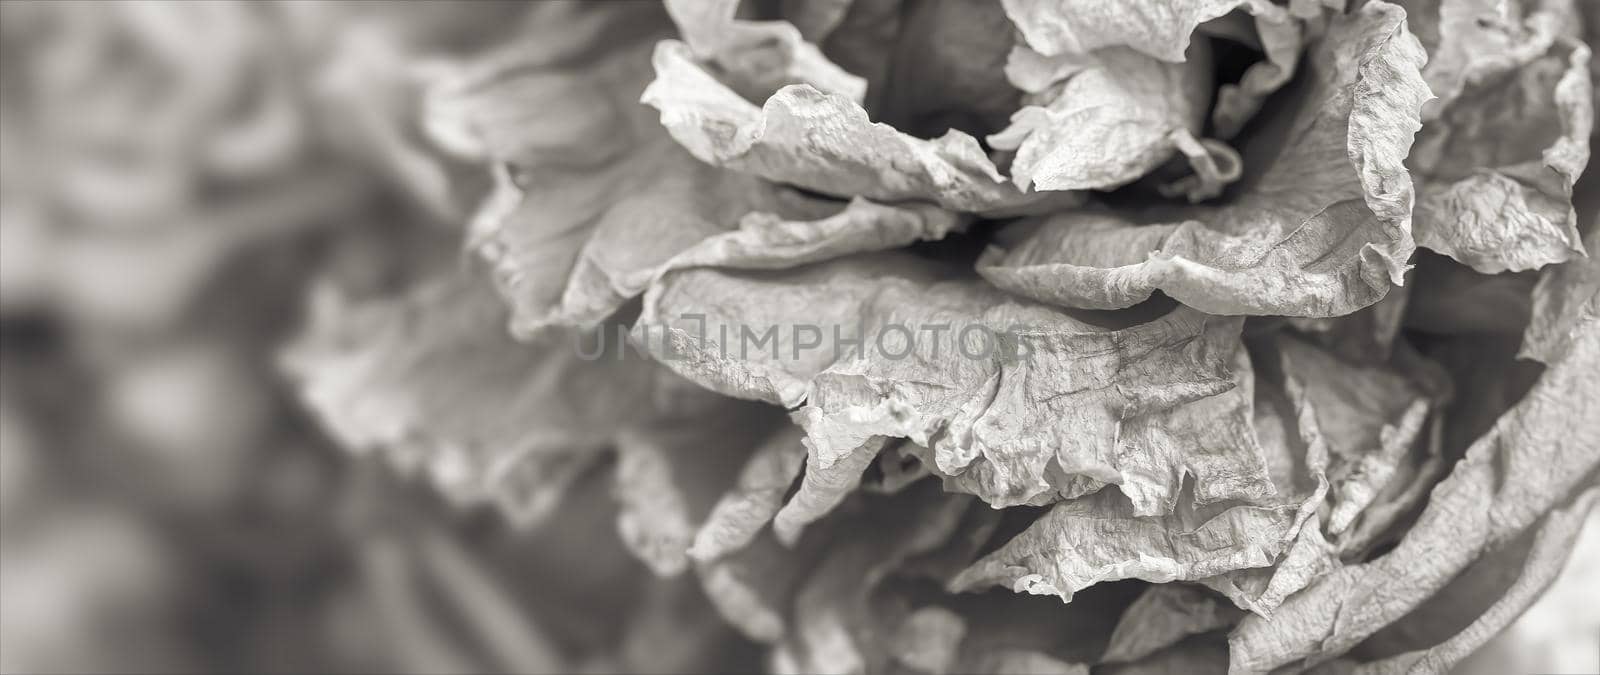 Dry roses. Close-up black and white image of dried rose flowers in a bouquet. Life and death concept. Withered flowers